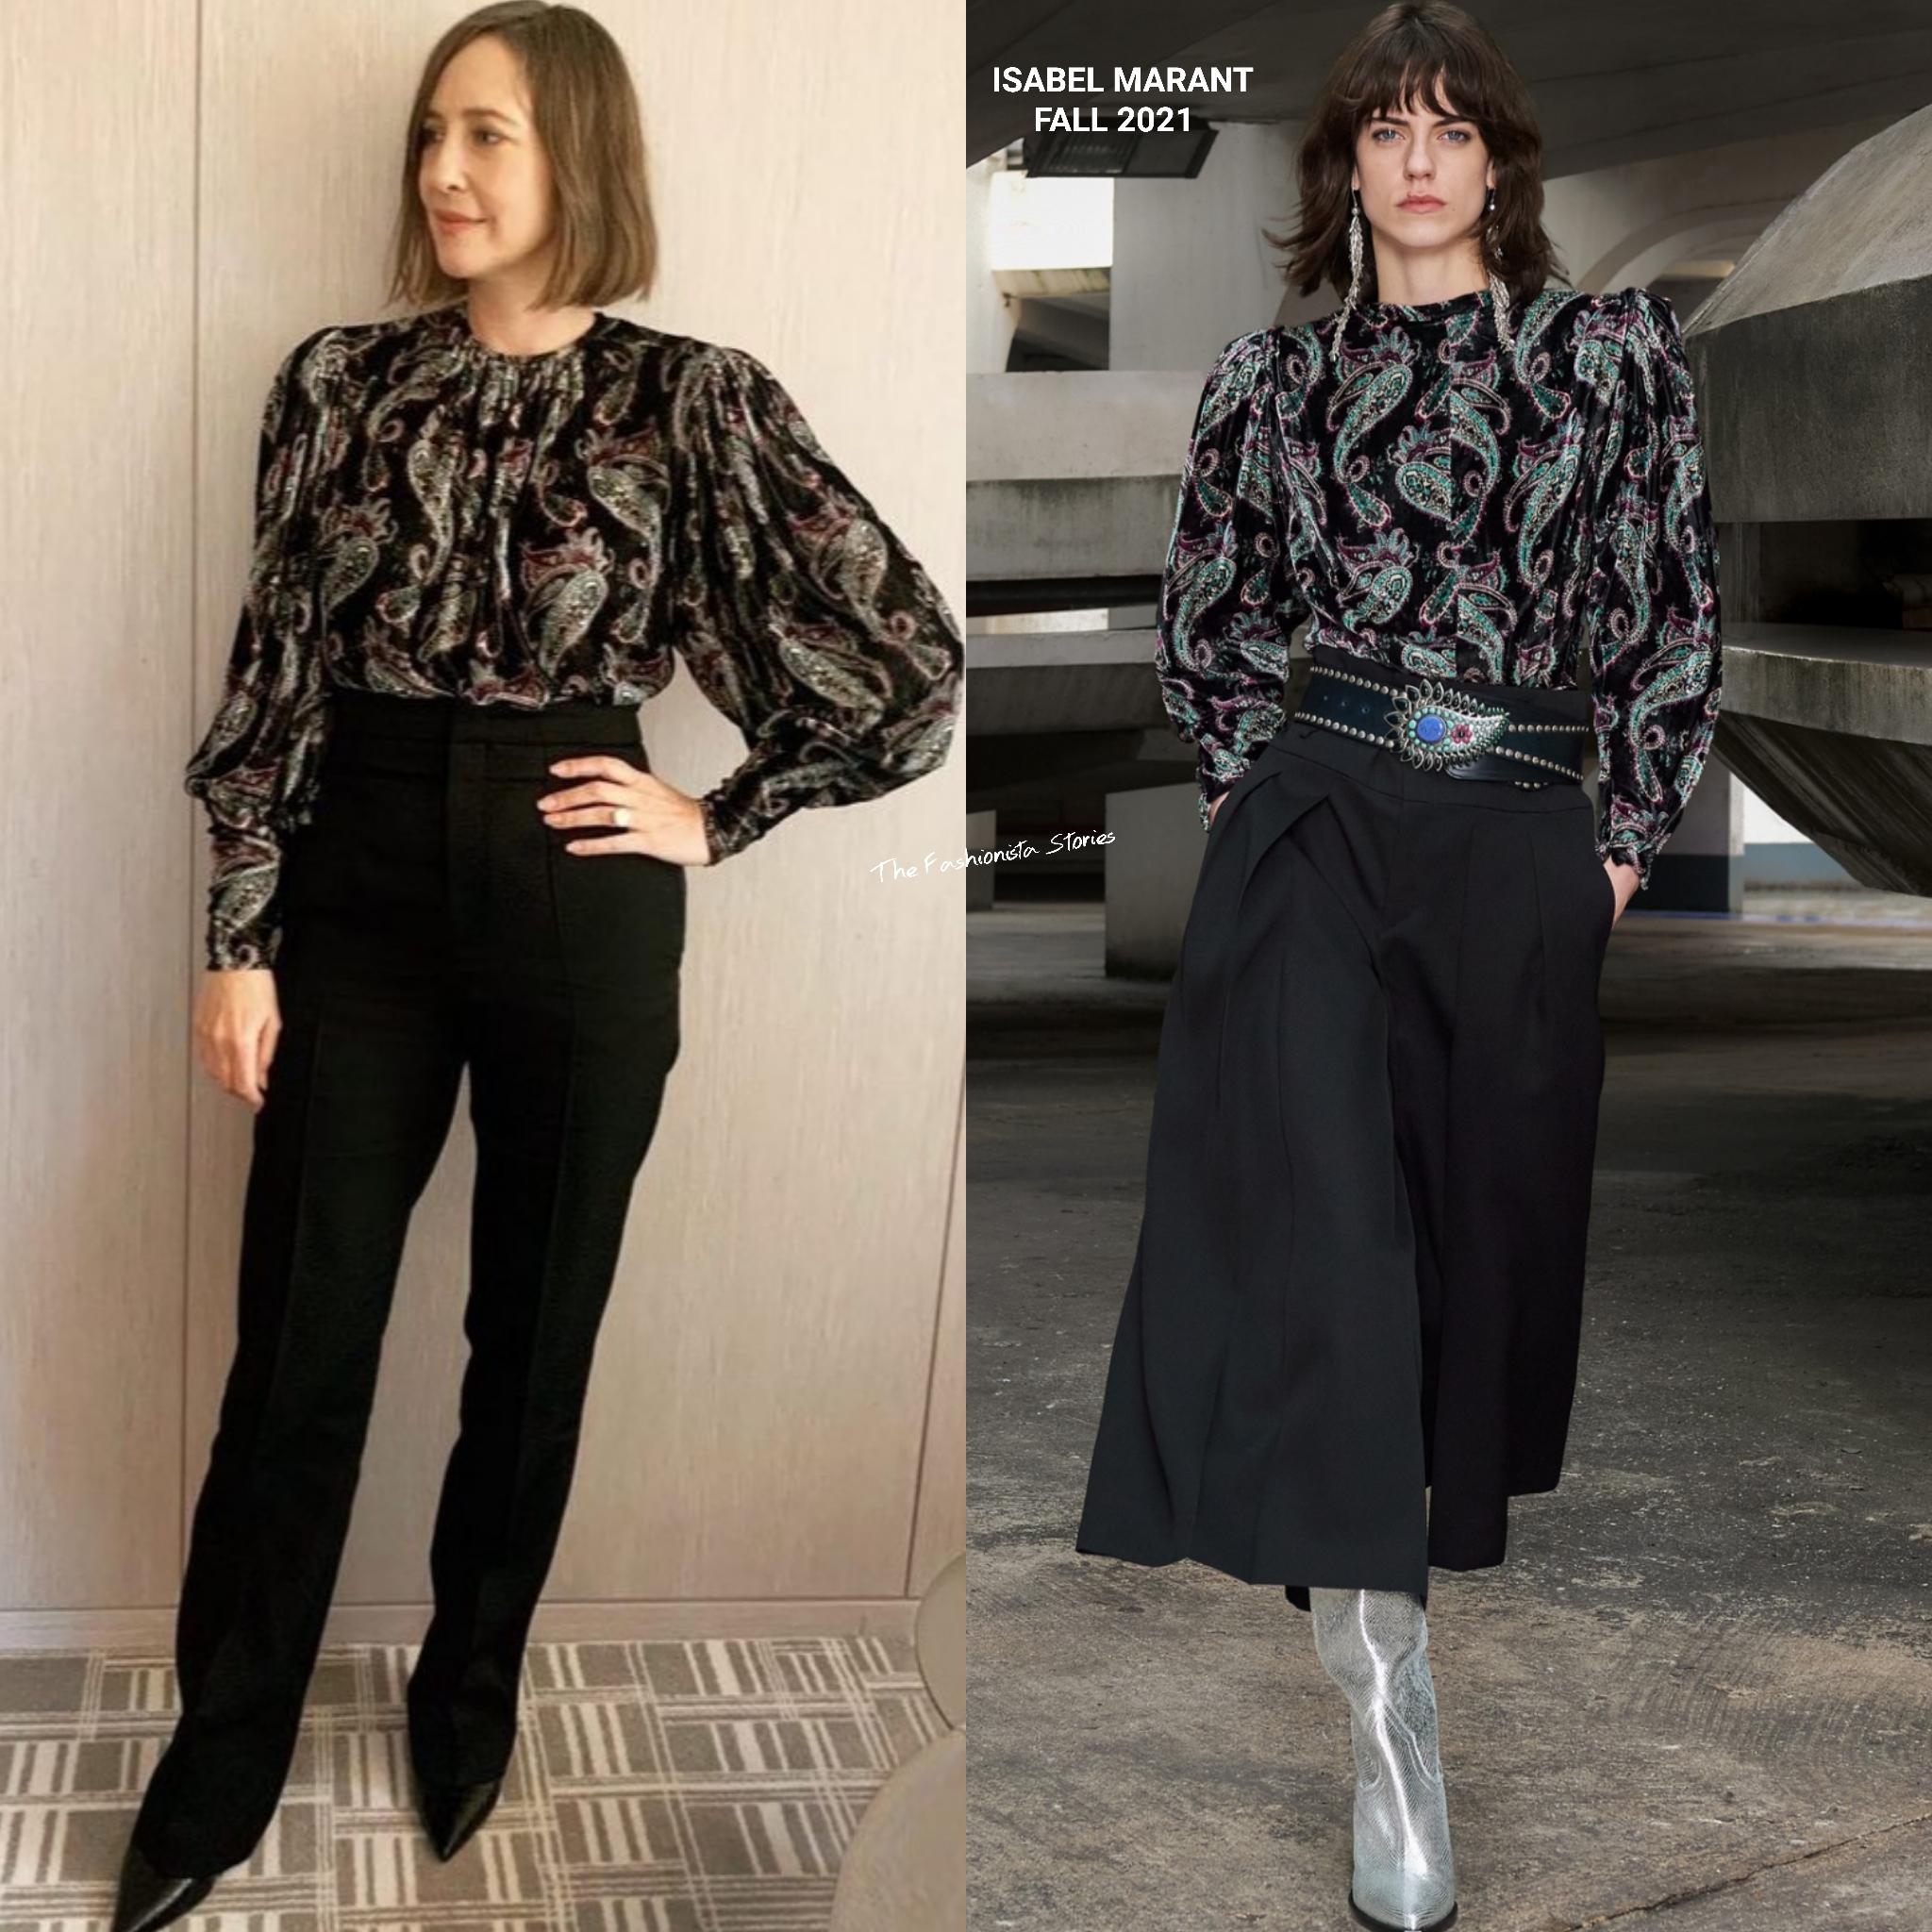 Instagram Style: Vera in Isabel Marant to Promote ''The Many Saints of